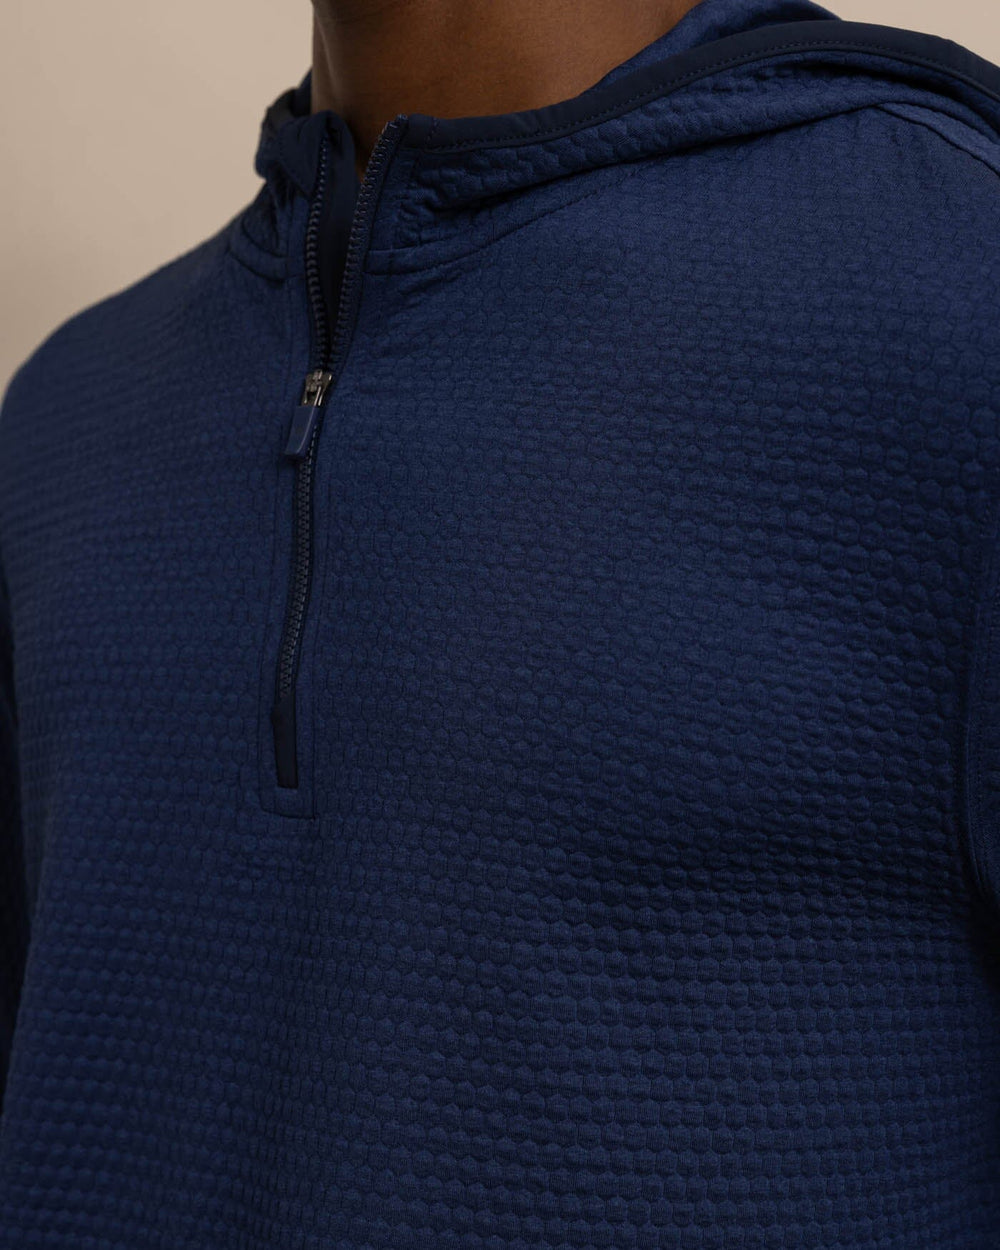 The detail view of the Southern Tide Scuttle Heather Performance Quarter Zip Hoodie by Southern Tide - Heather True Navy